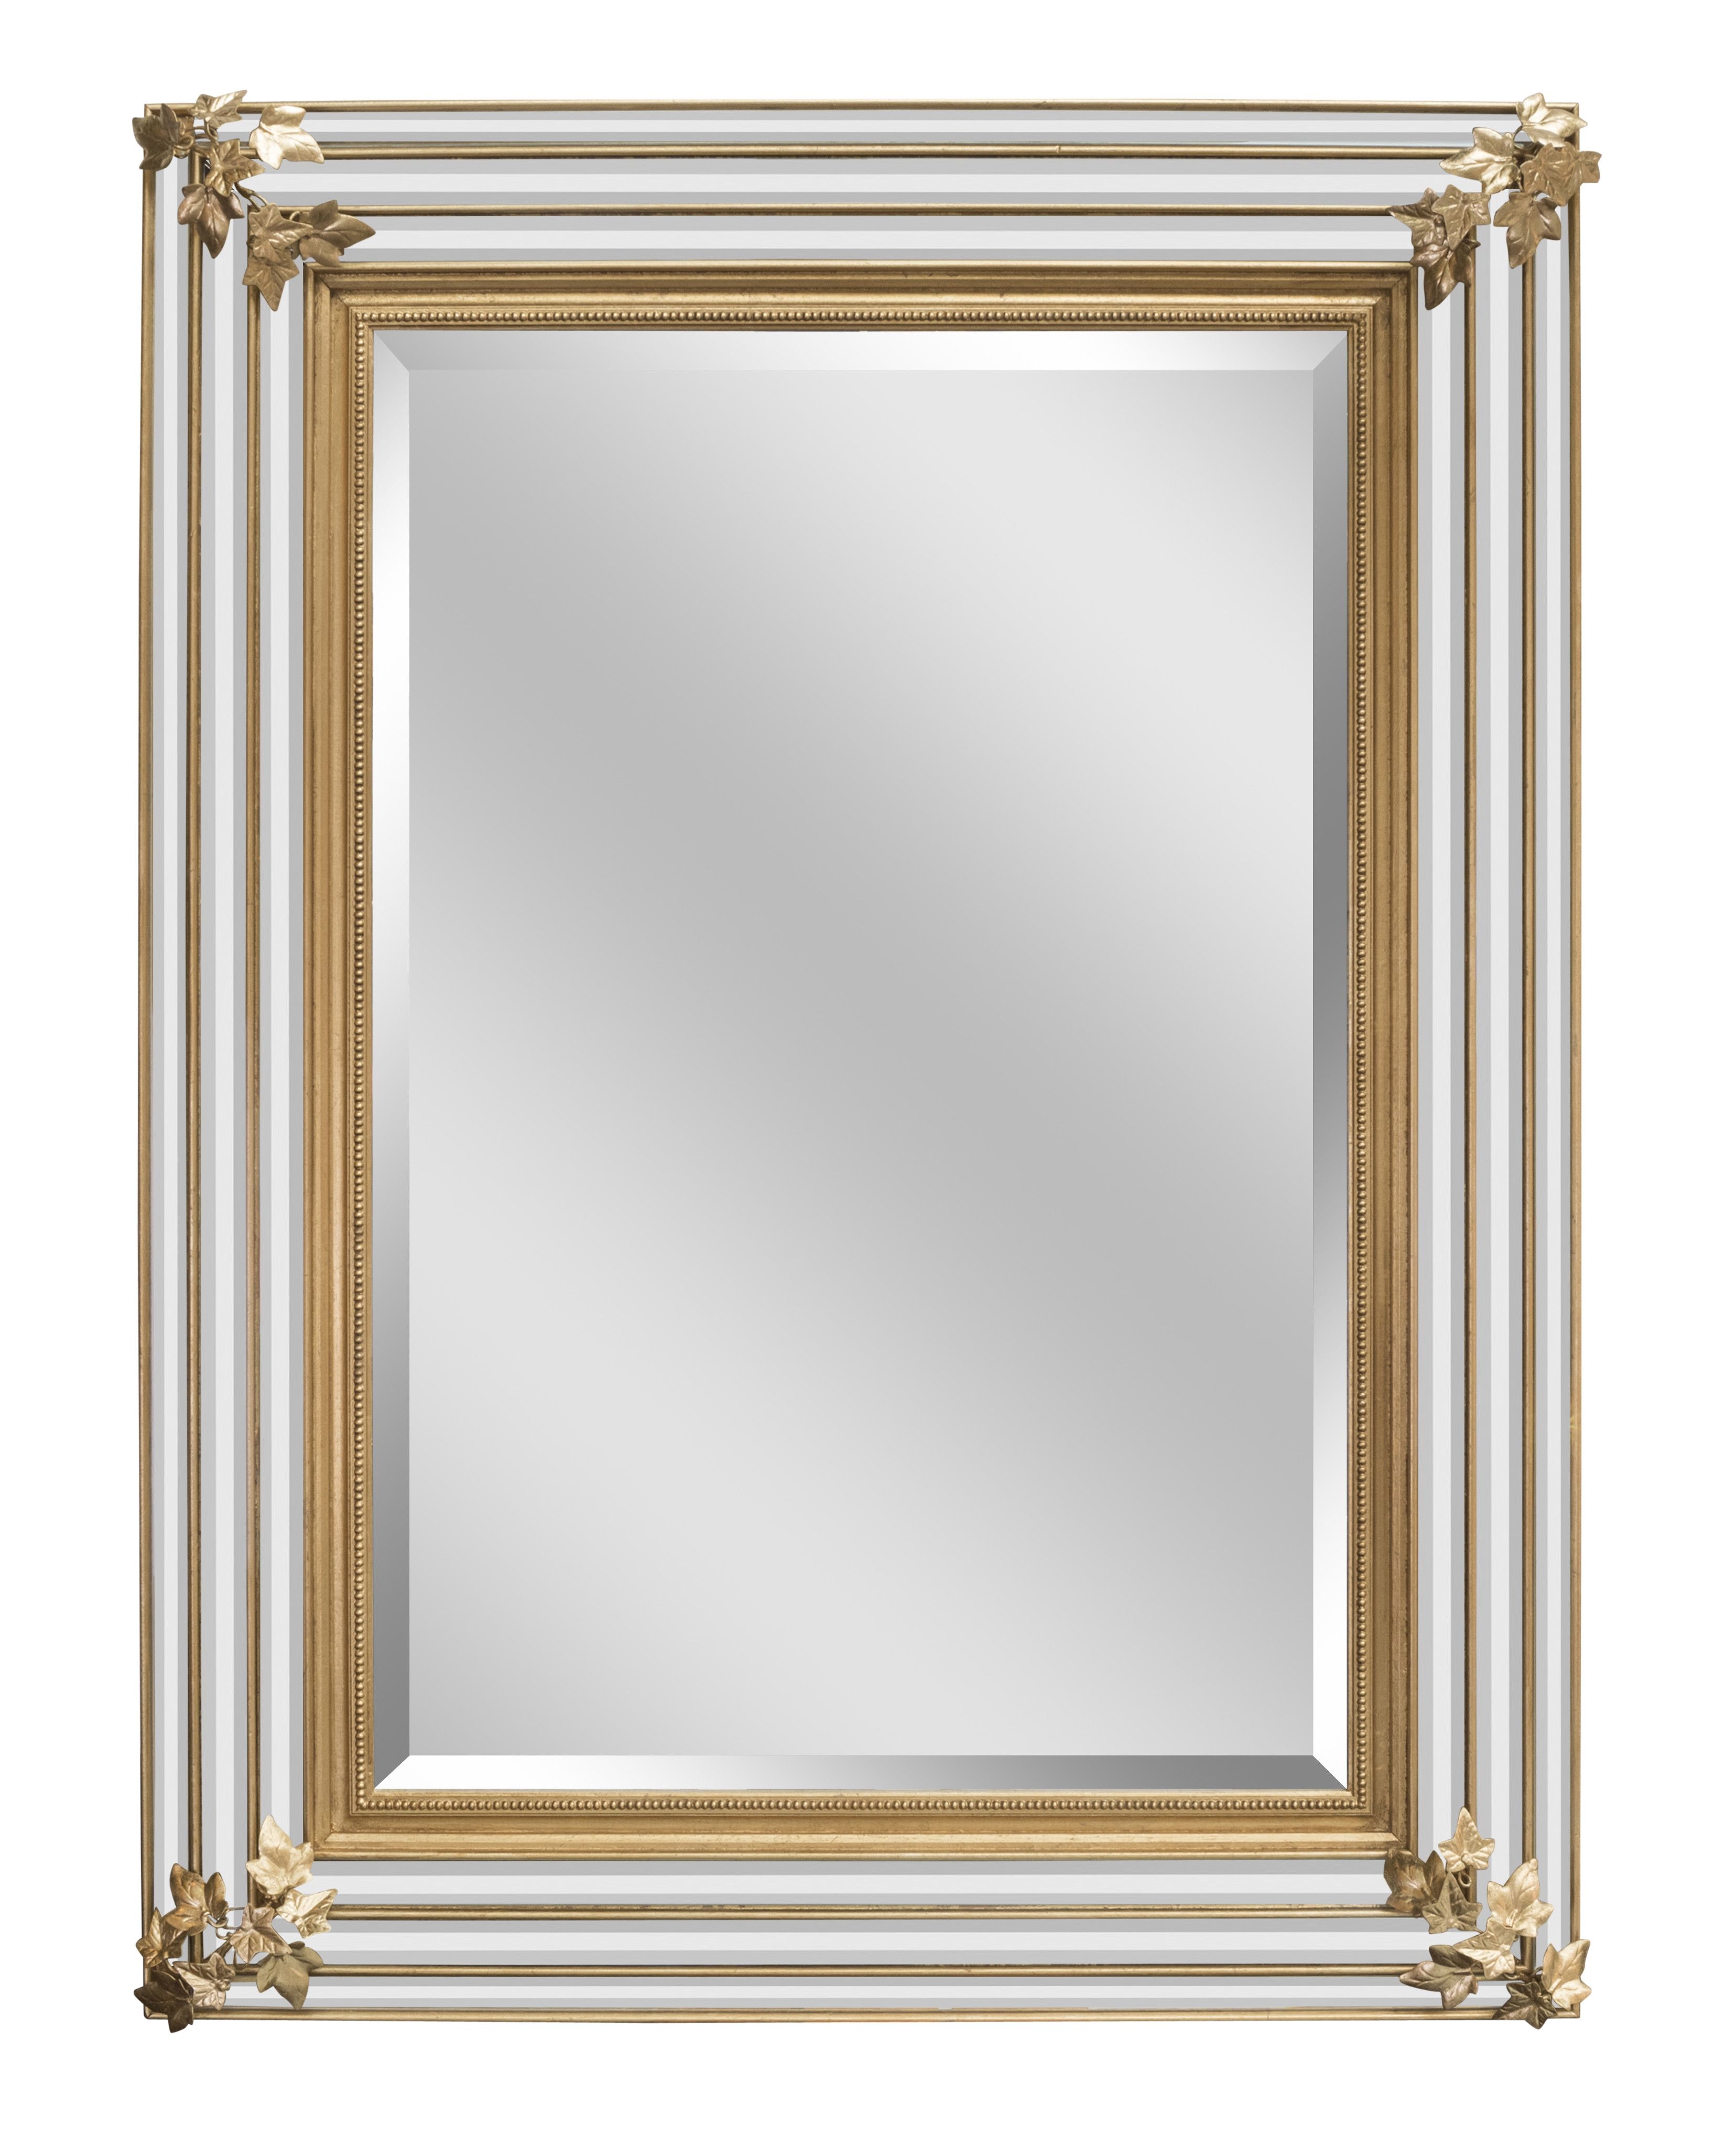 Ivy Cushion Mirror Large Mirrors For Sale Panfili Mirrors In Brass Mirrors For Sale (View 9 of 15)